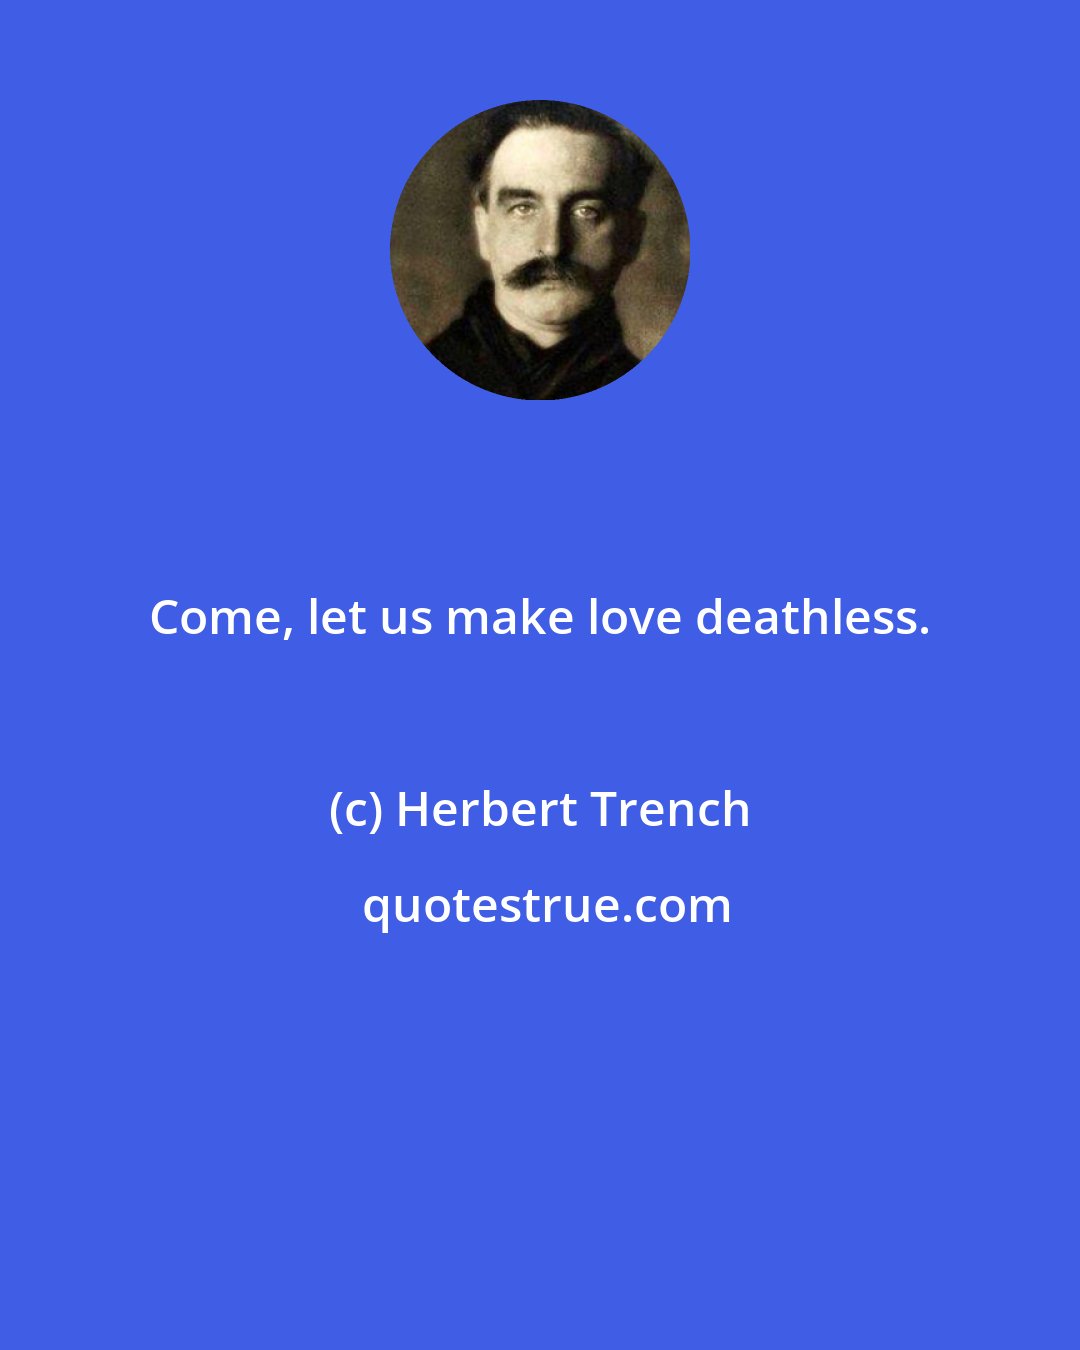 Herbert Trench: Come, let us make love deathless.